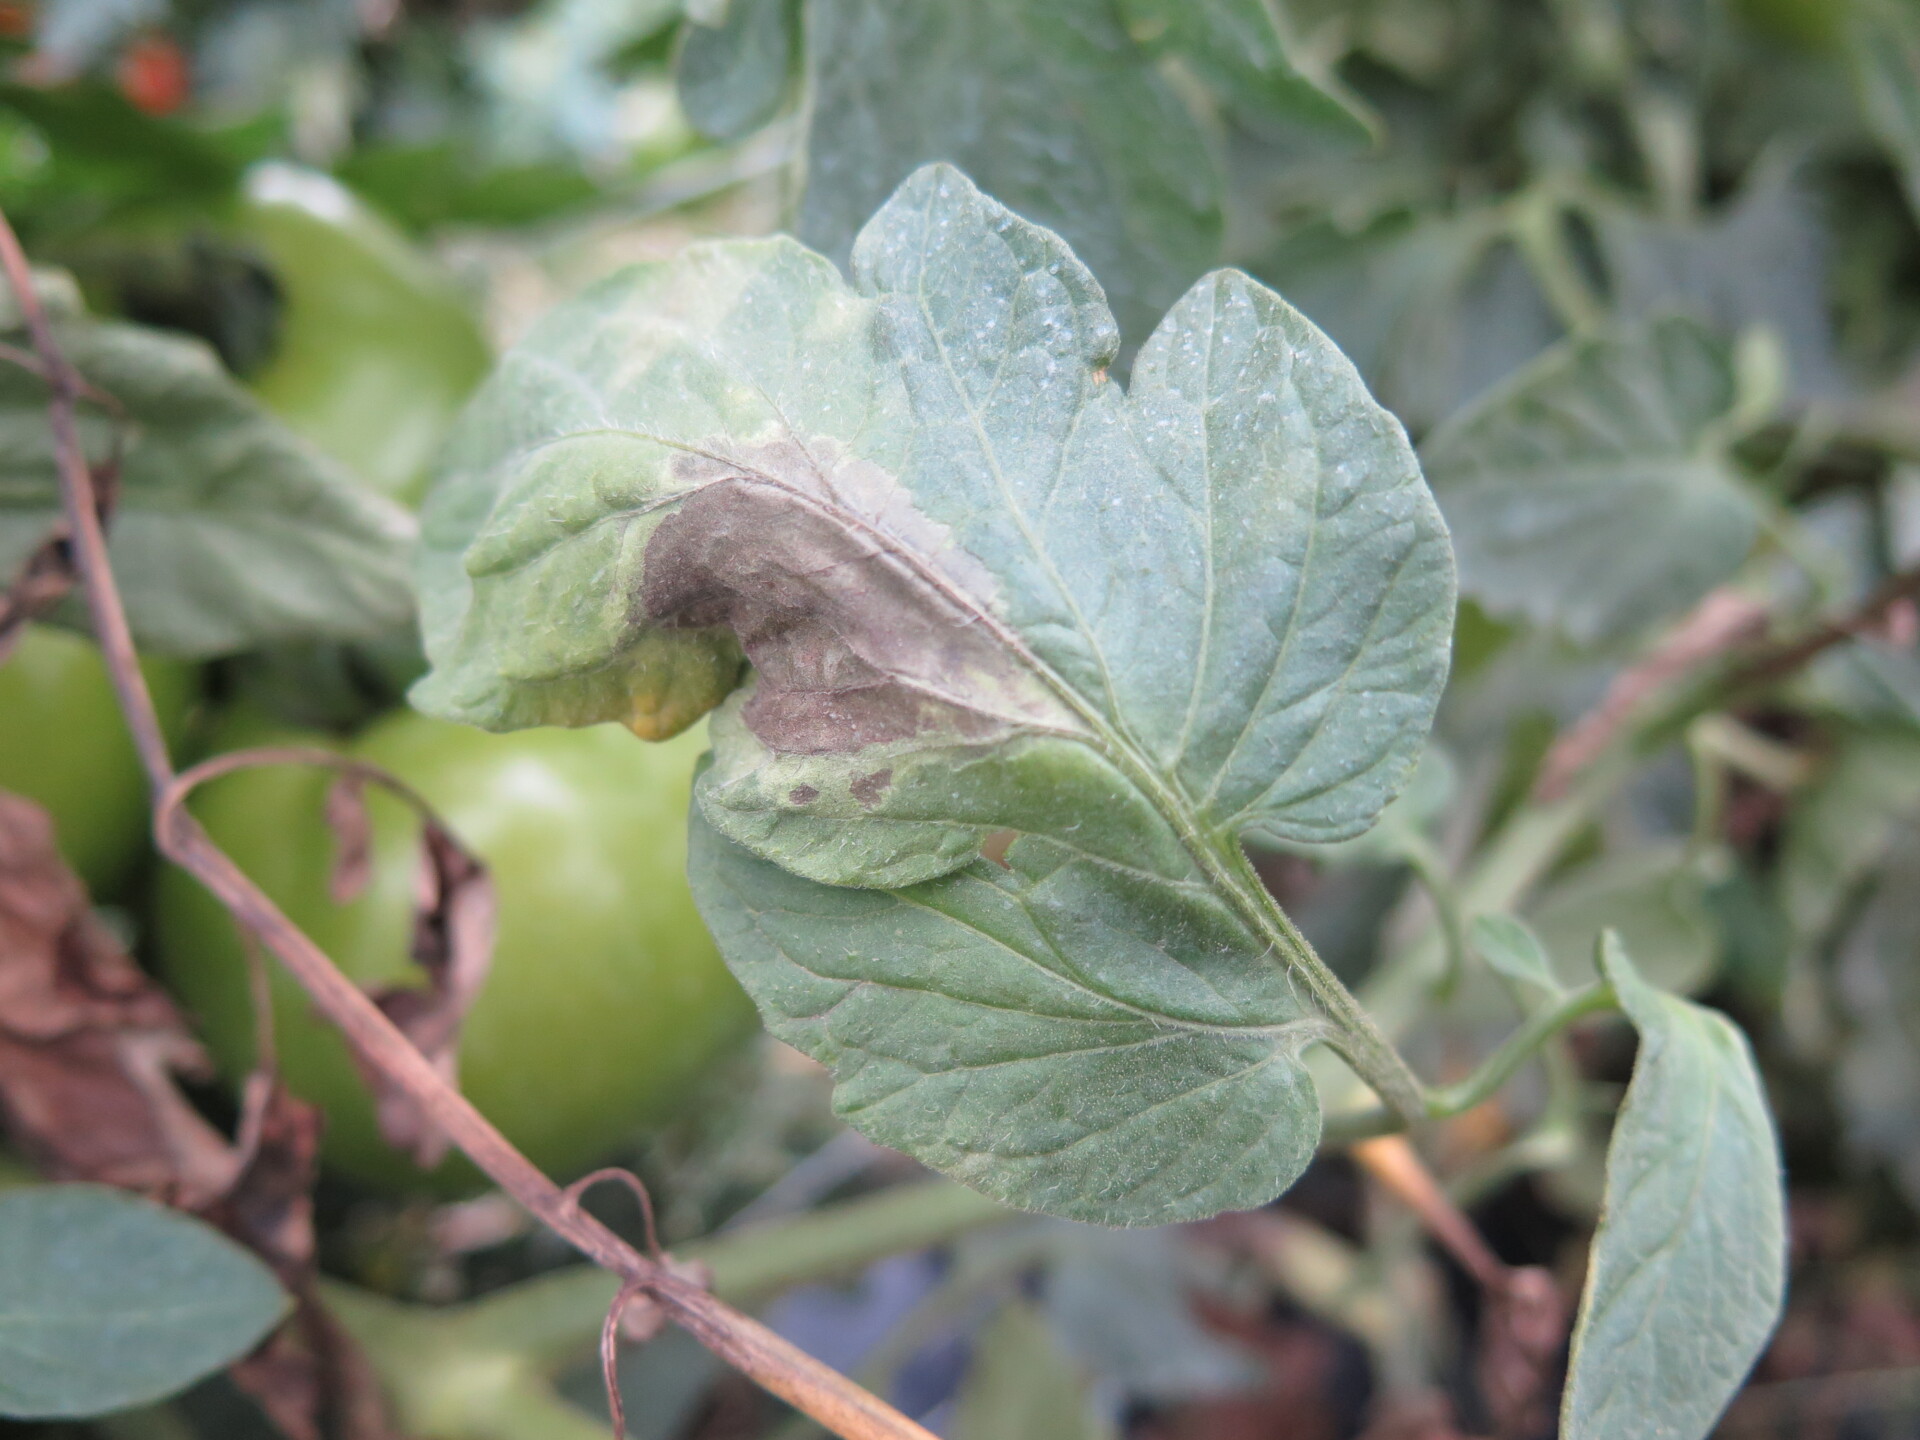 Leaf lesion of late blight of tomato.